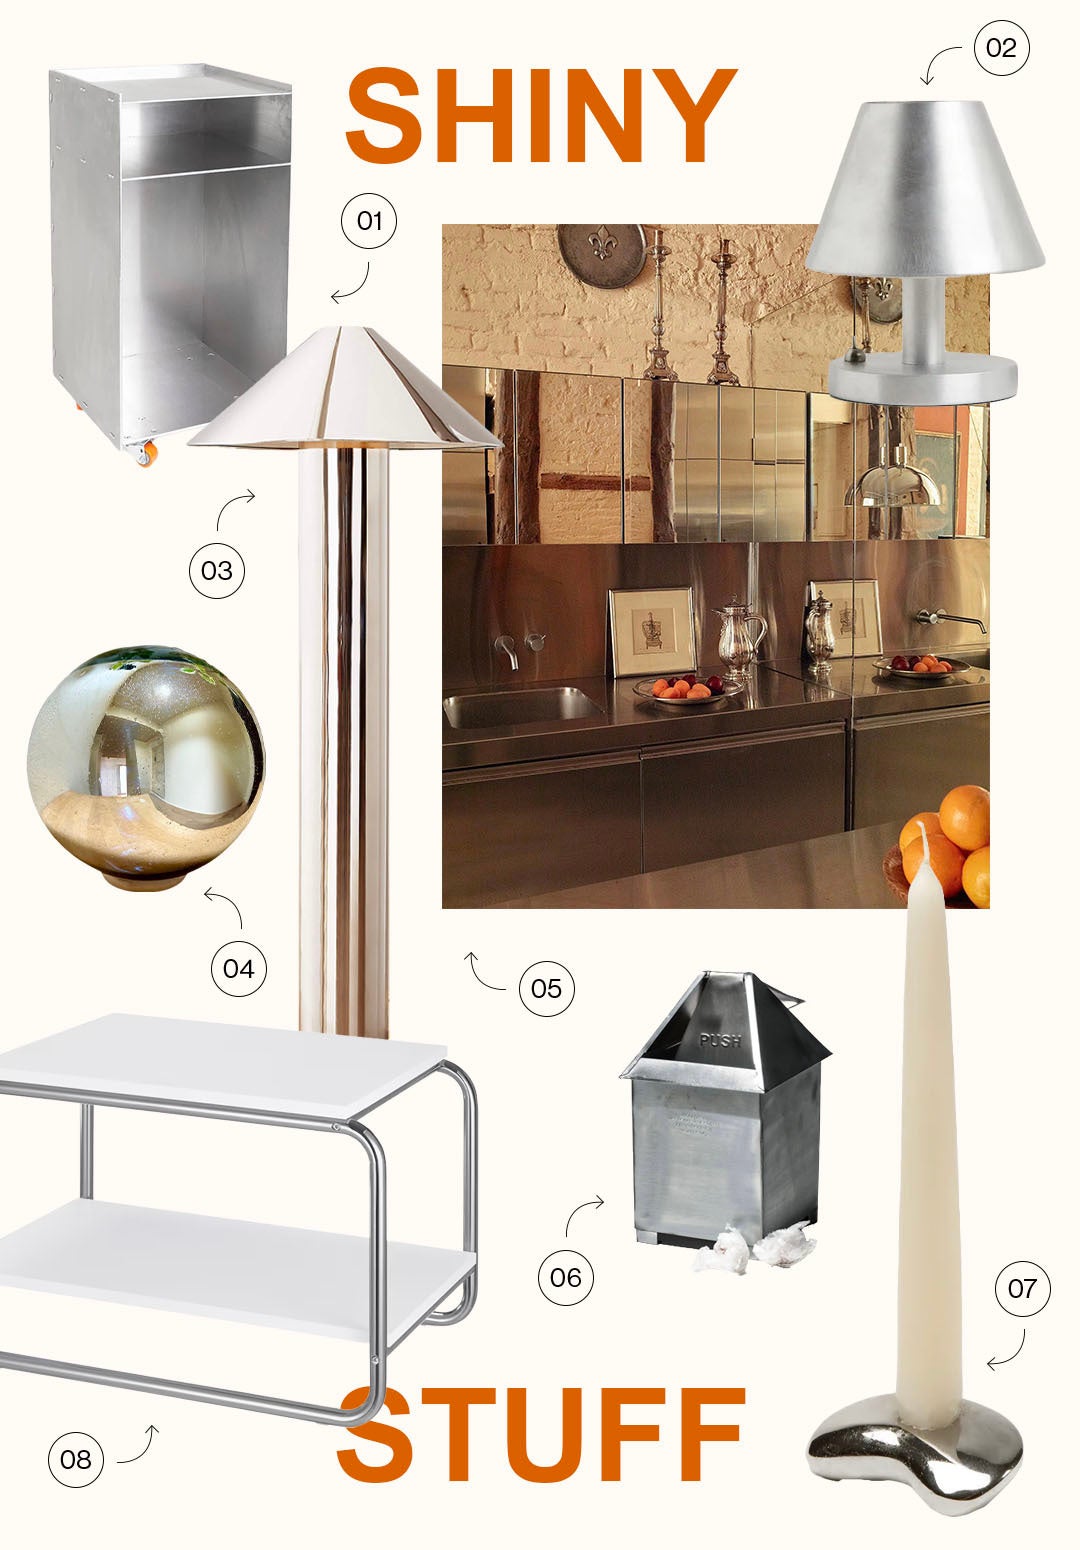 moodboard of furniture and objects with chrome finish